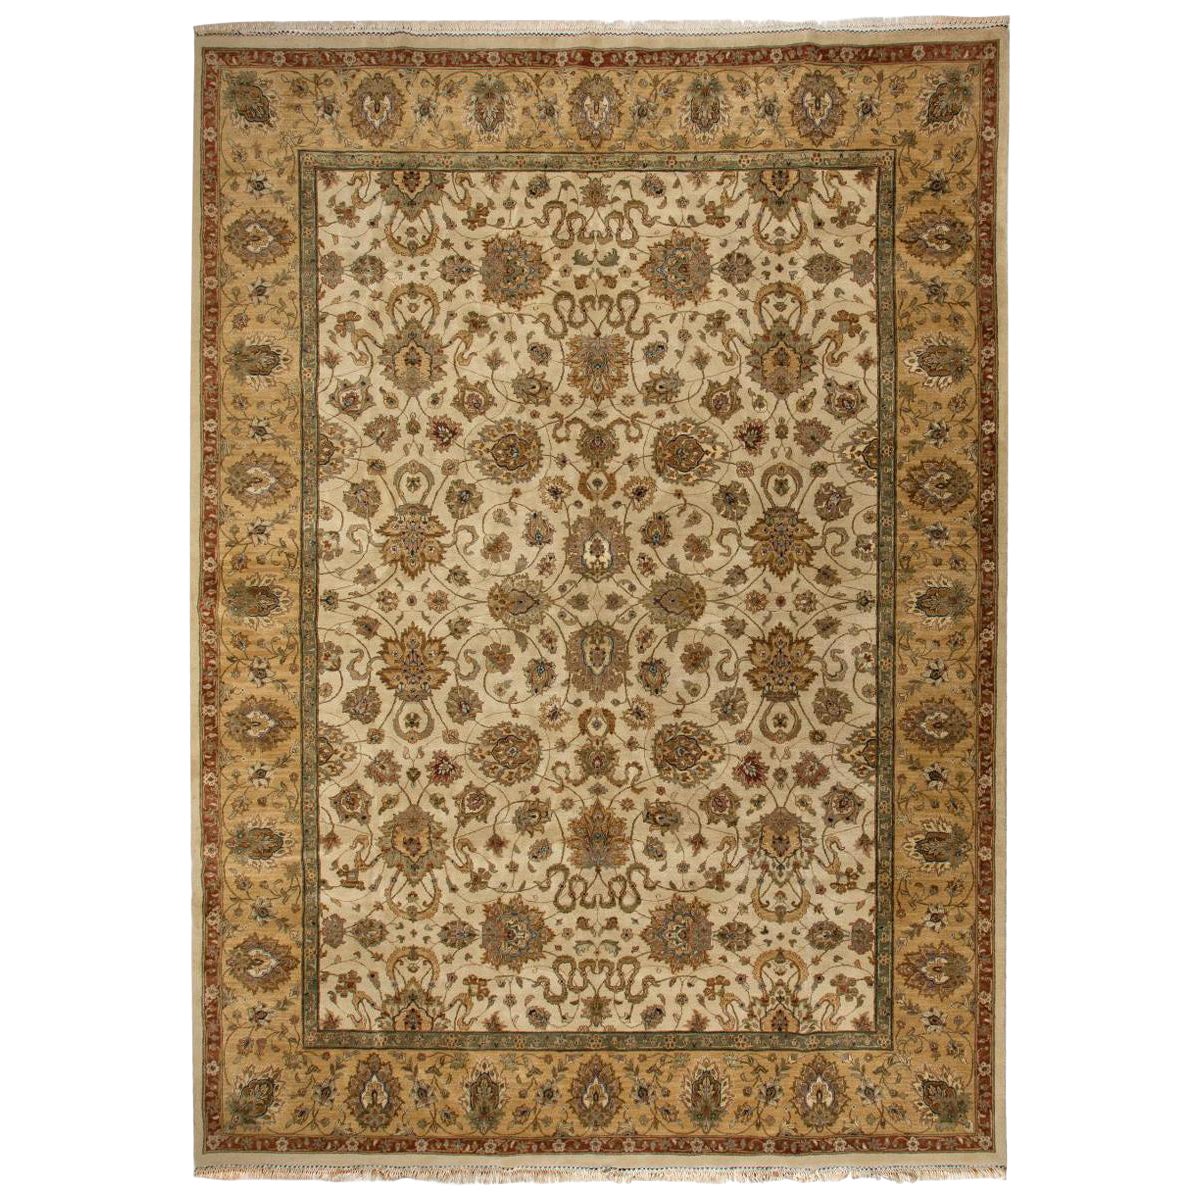 9x12 Ft Handmade Turkish Oushak Large Area Rug, 100% Soft Wool & Natural Dyes For Sale